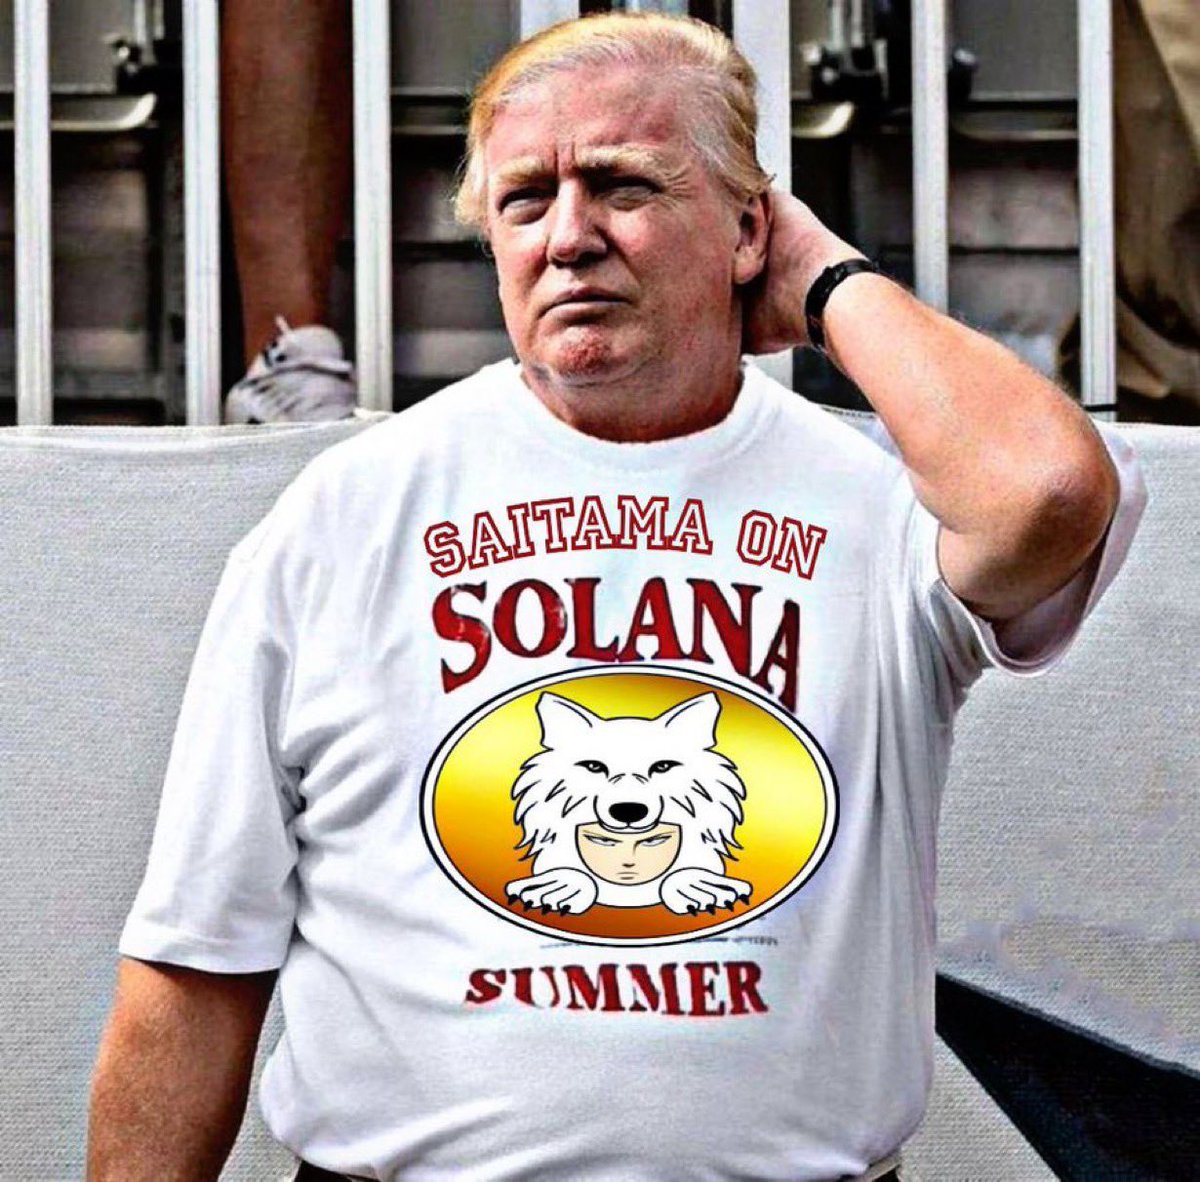 Even @realDonaldTrump knows it’s going to be a Saitama Summer on Solana. $SOL